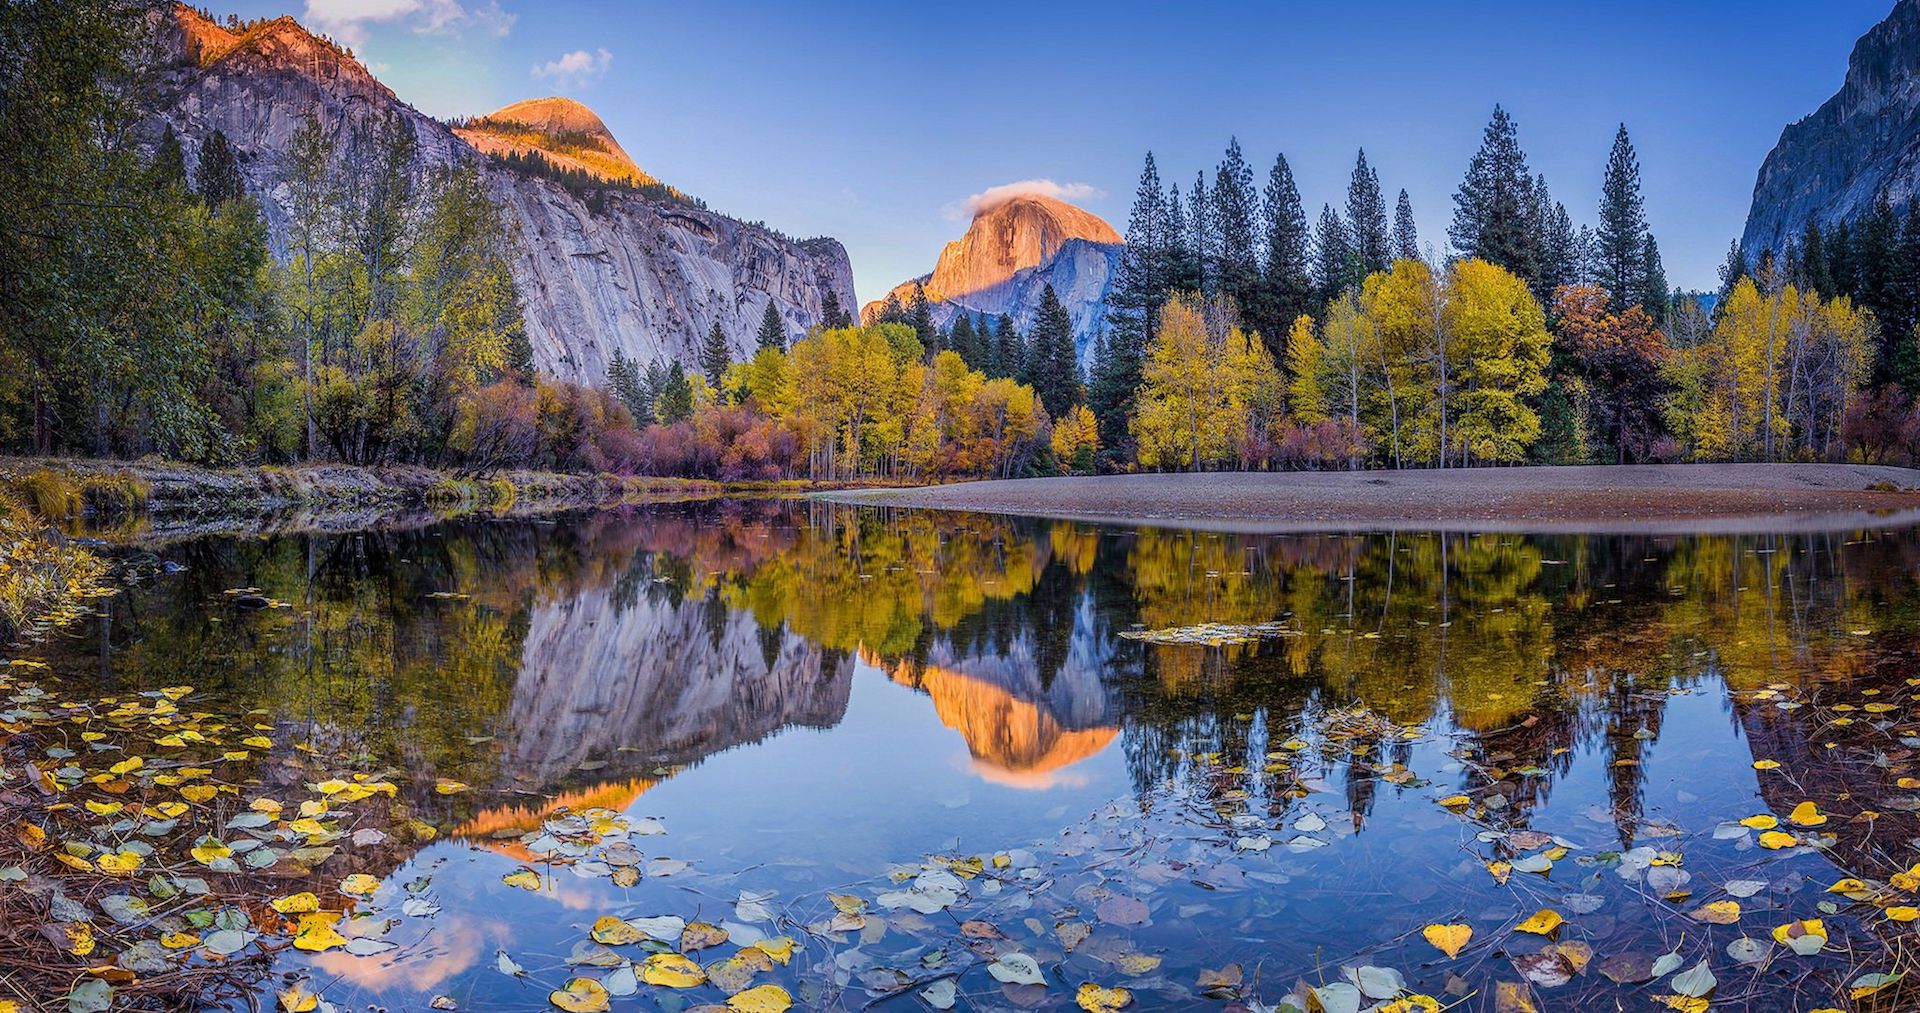 15 Best yosemite desktop background You Can Get It Free Of Charge ...